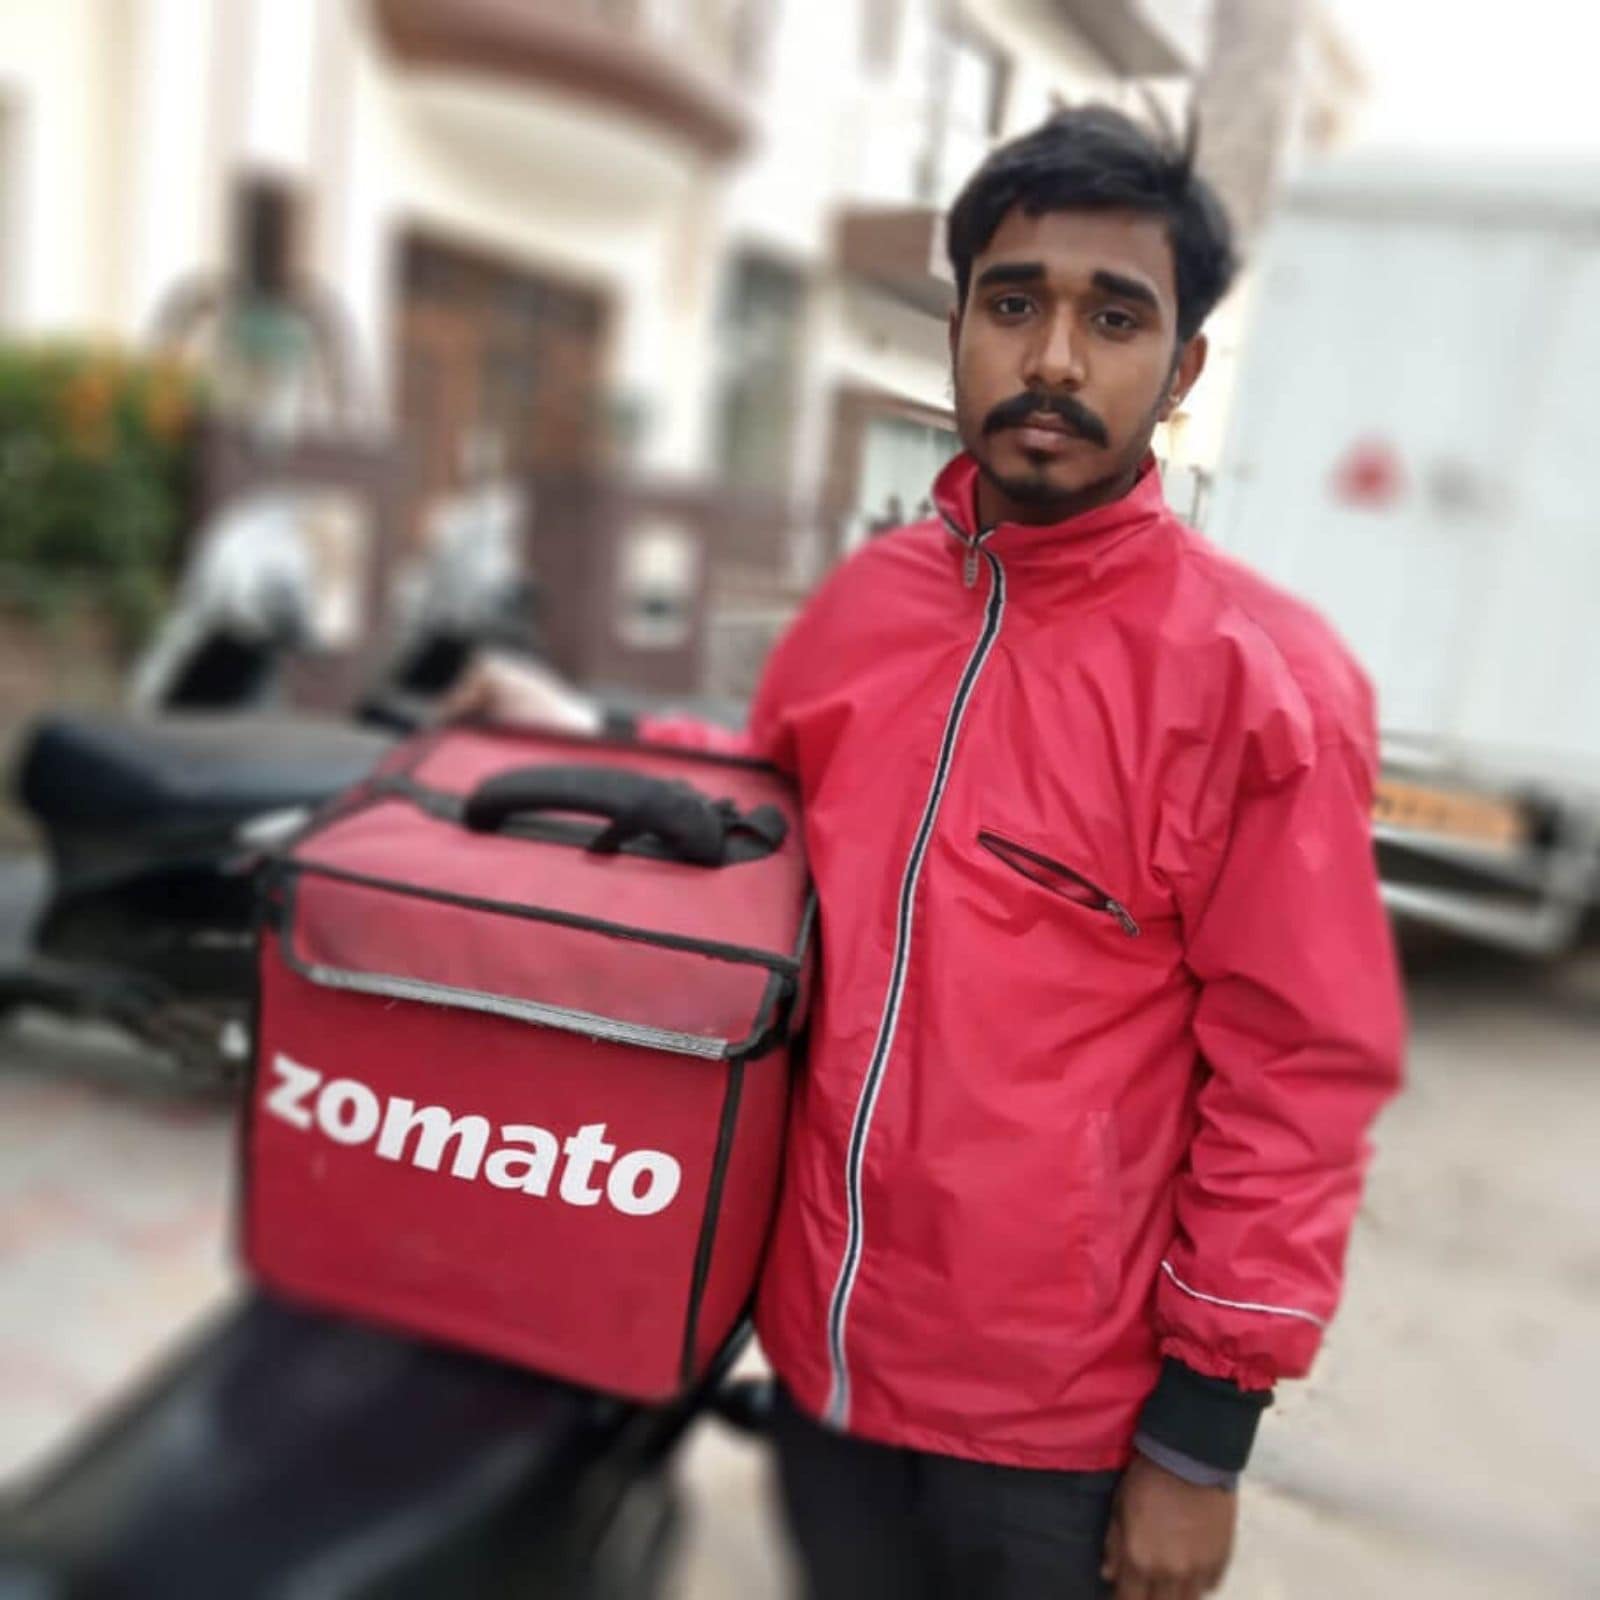 Buy Quaffor Insular red 16 * 16 * 16 inch zomato/swiggy/Food/Pizza delivery  Backpack 63 LTR at Amazon.in